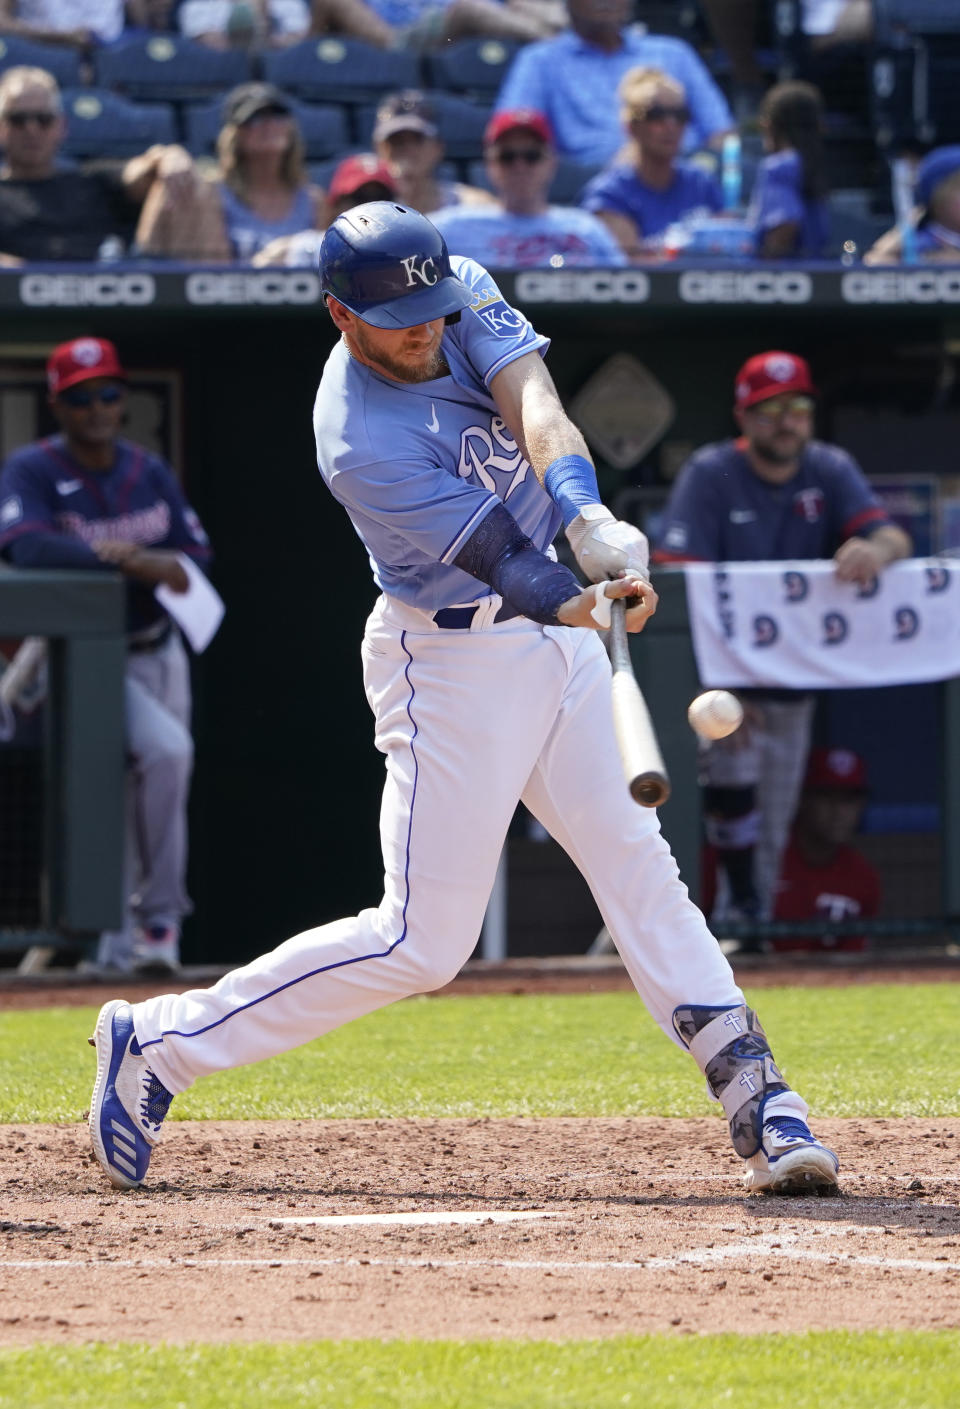 Kansas City Royals' Hunter Dozier hits a two-run double in the fourth inning during a baseball game against the Minnesota Twins, Saturday July 3, 2021, in Kansas City, Mo. (AP Photo/Ed Zurga)